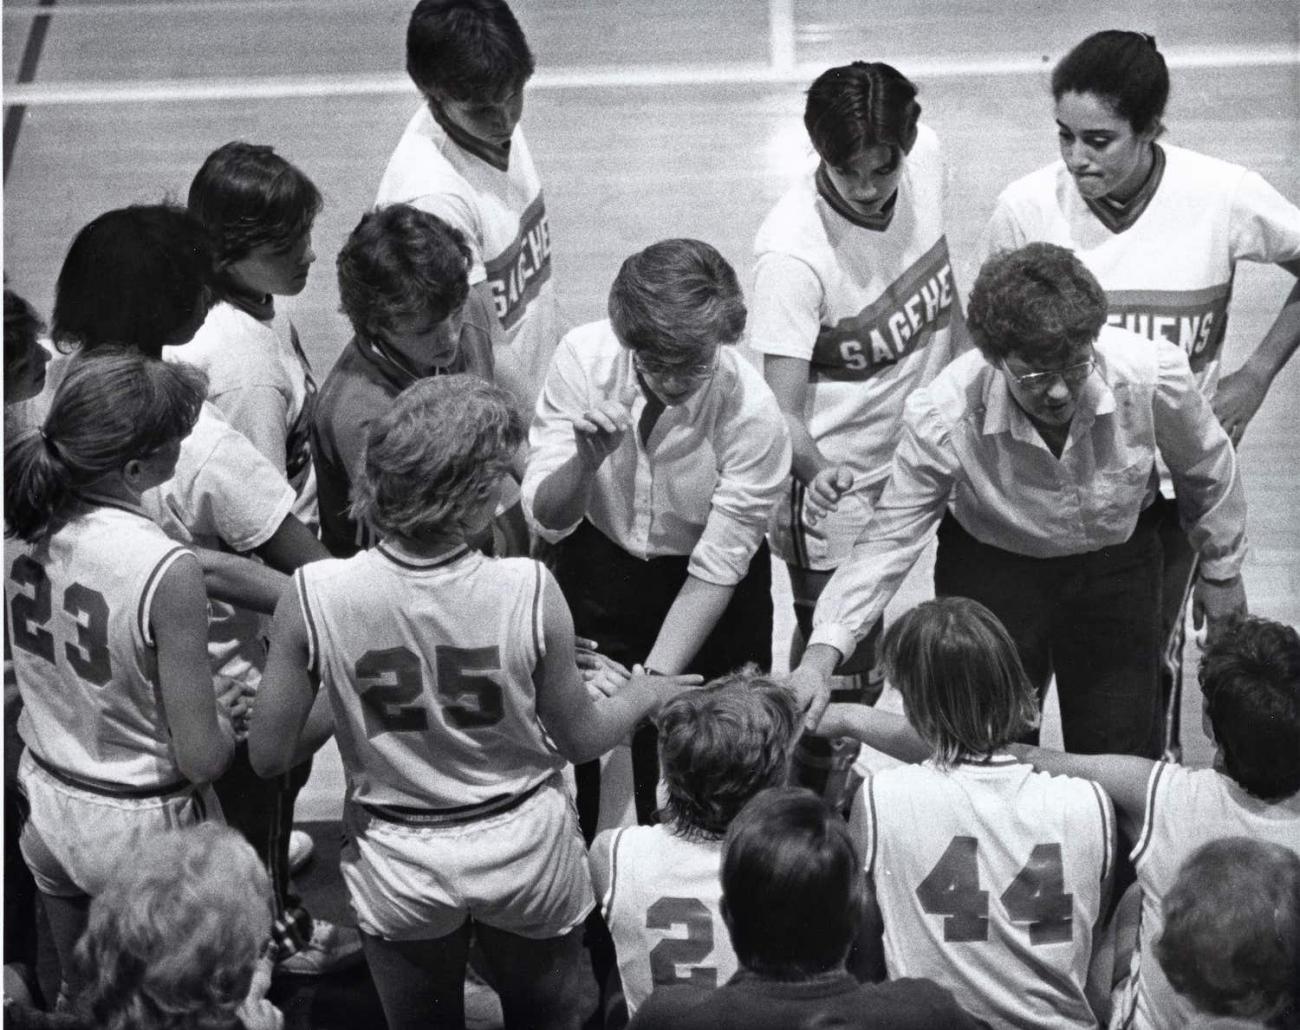 Coach Nancy Breitenstein and her assistant Nettie Morrison in the huddle with a Sagehens team. 